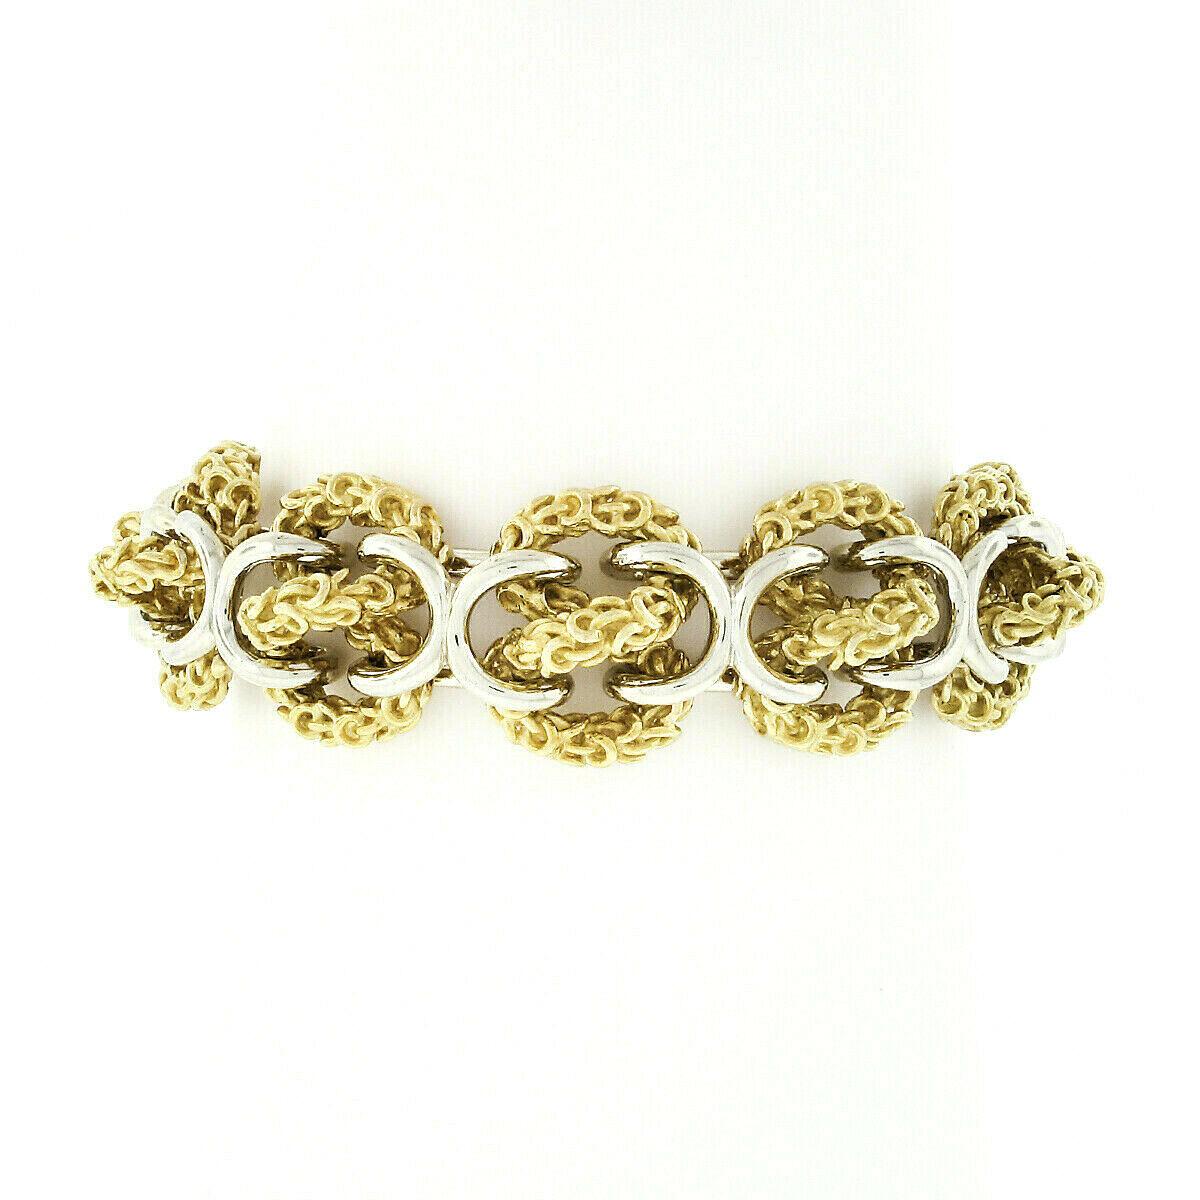 Here we have an outstanding, vintage, 3D infinity knot link bracelet that was crafted in Italy from solid 18k yellow and white gold. The bracelet's yellow gold infinity knots are intricately textured and are neatly connected with polished thick